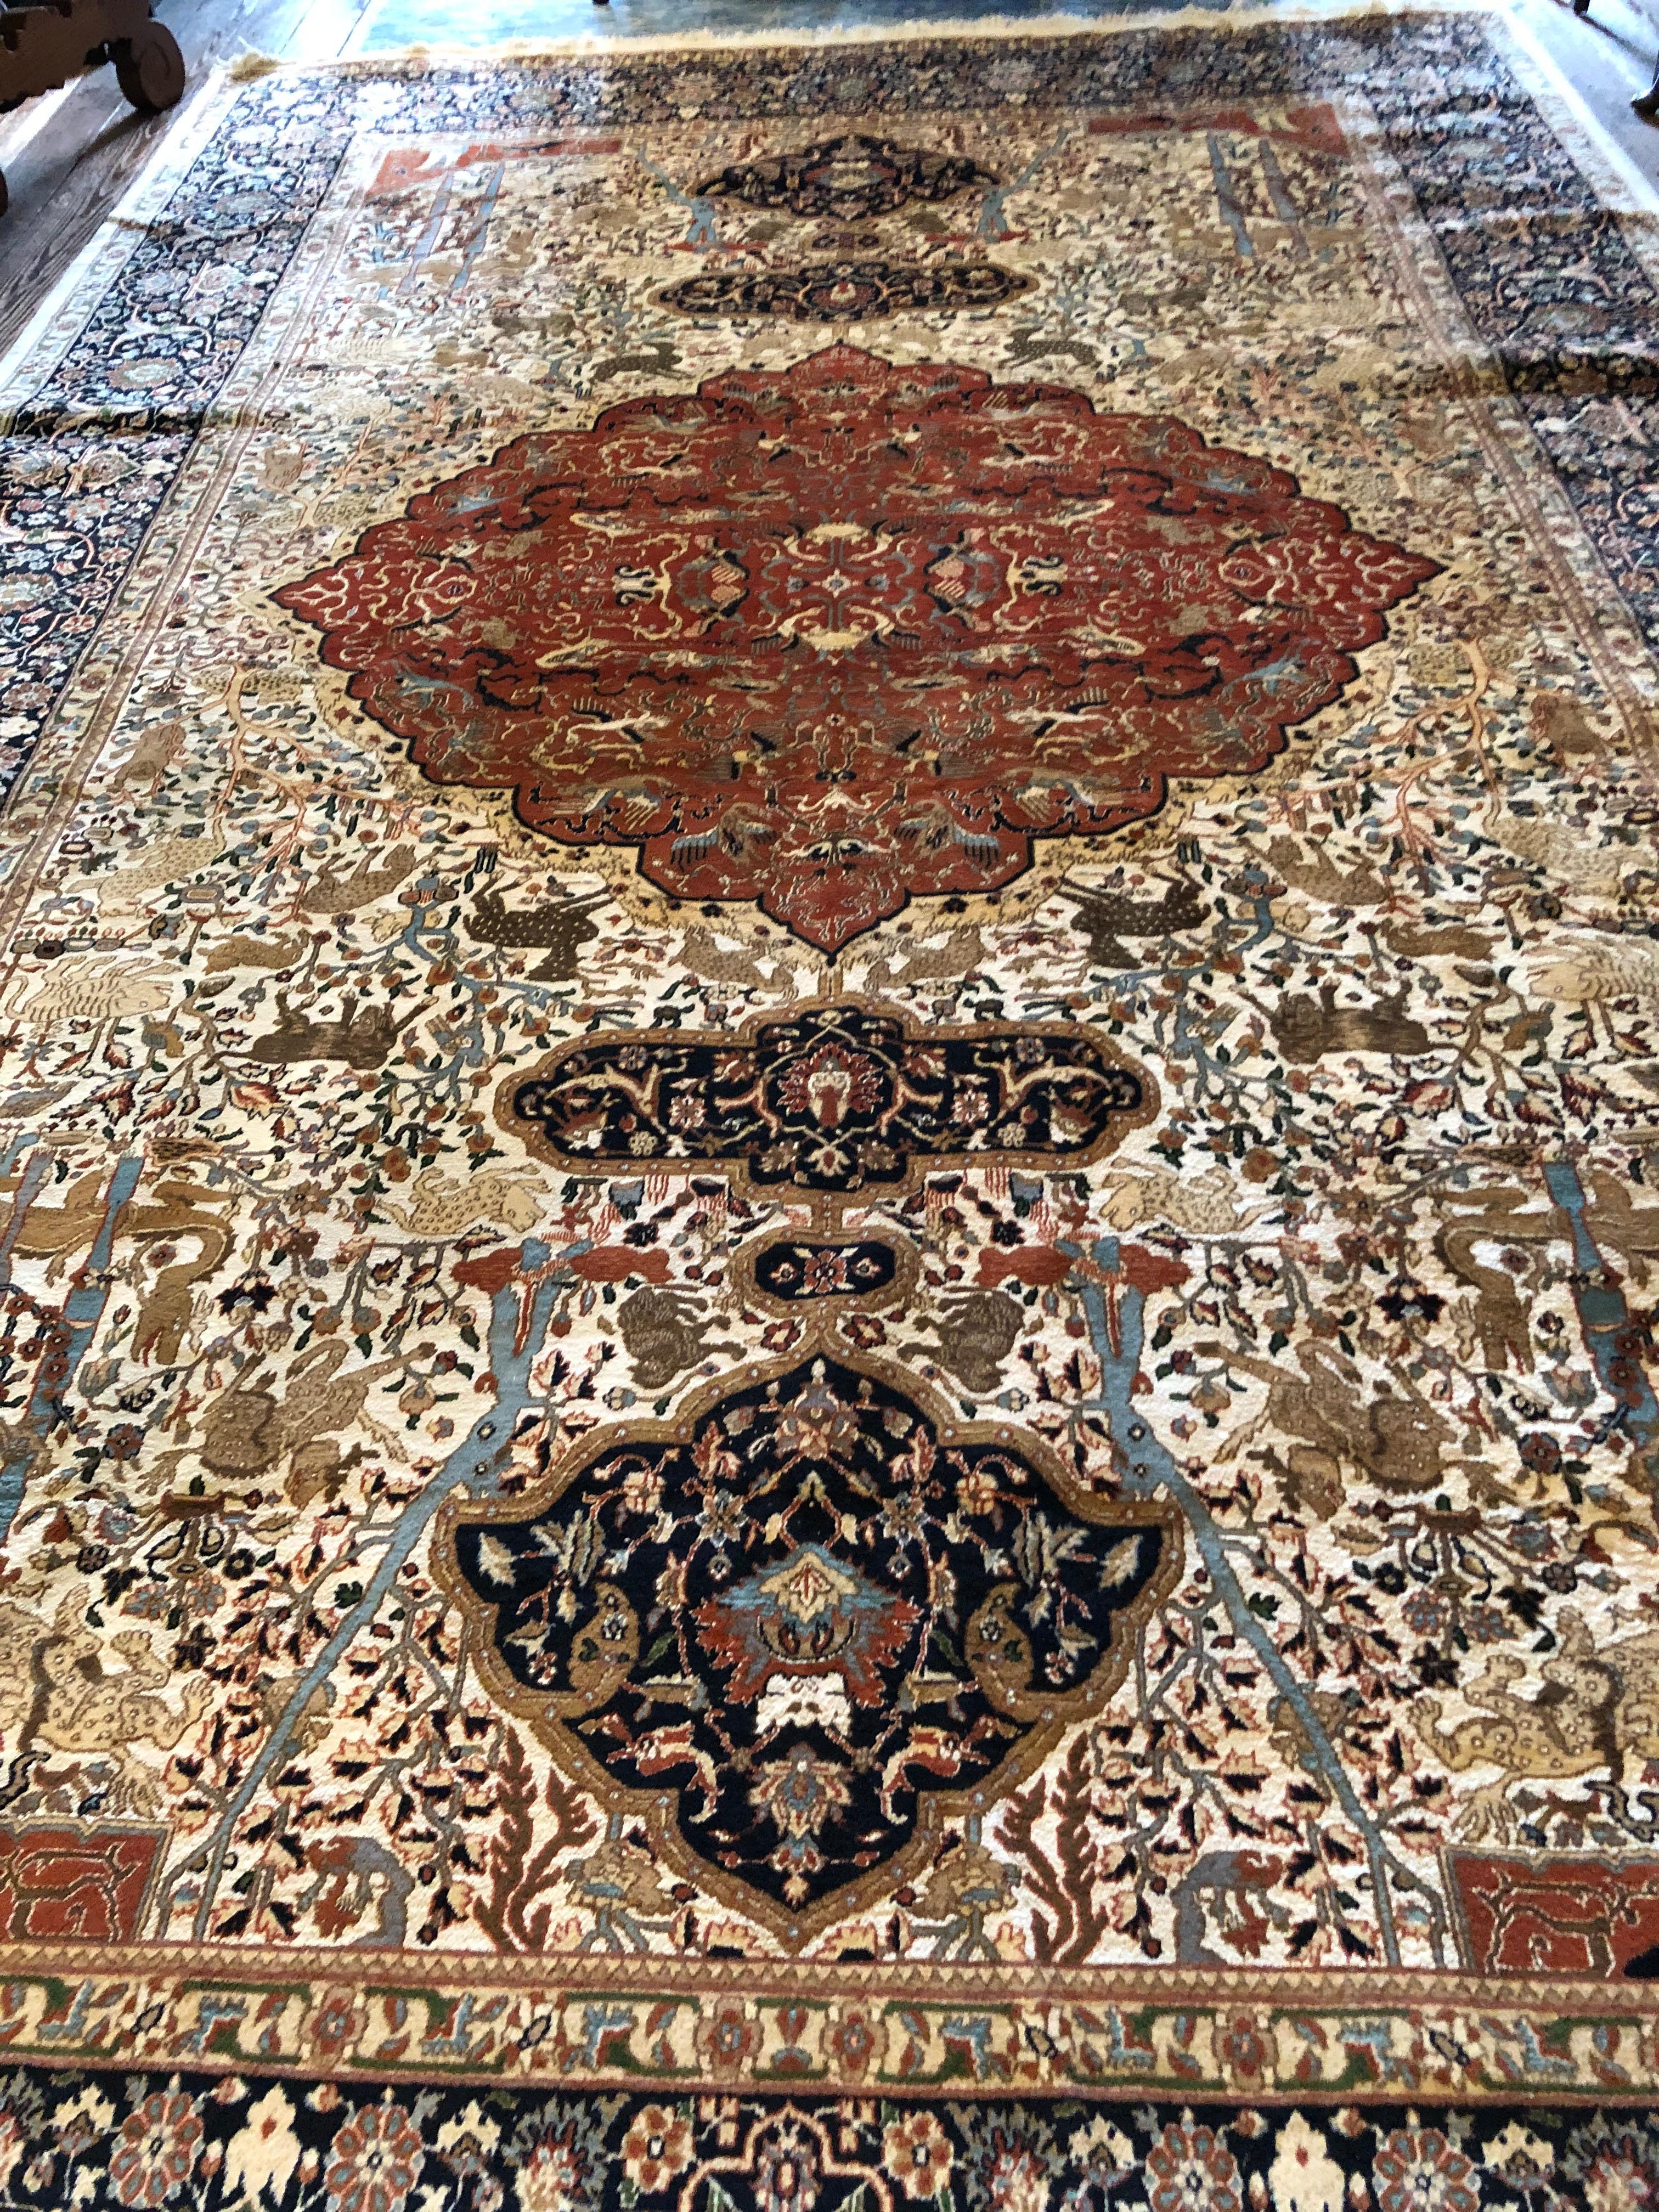 Rich pattern and coloration in a large imported wool rug having geometric shapes as well as whimsical animals in the design.  Color palette has many earth tones as well as navy and powder blue and cream.

(Sorensen)